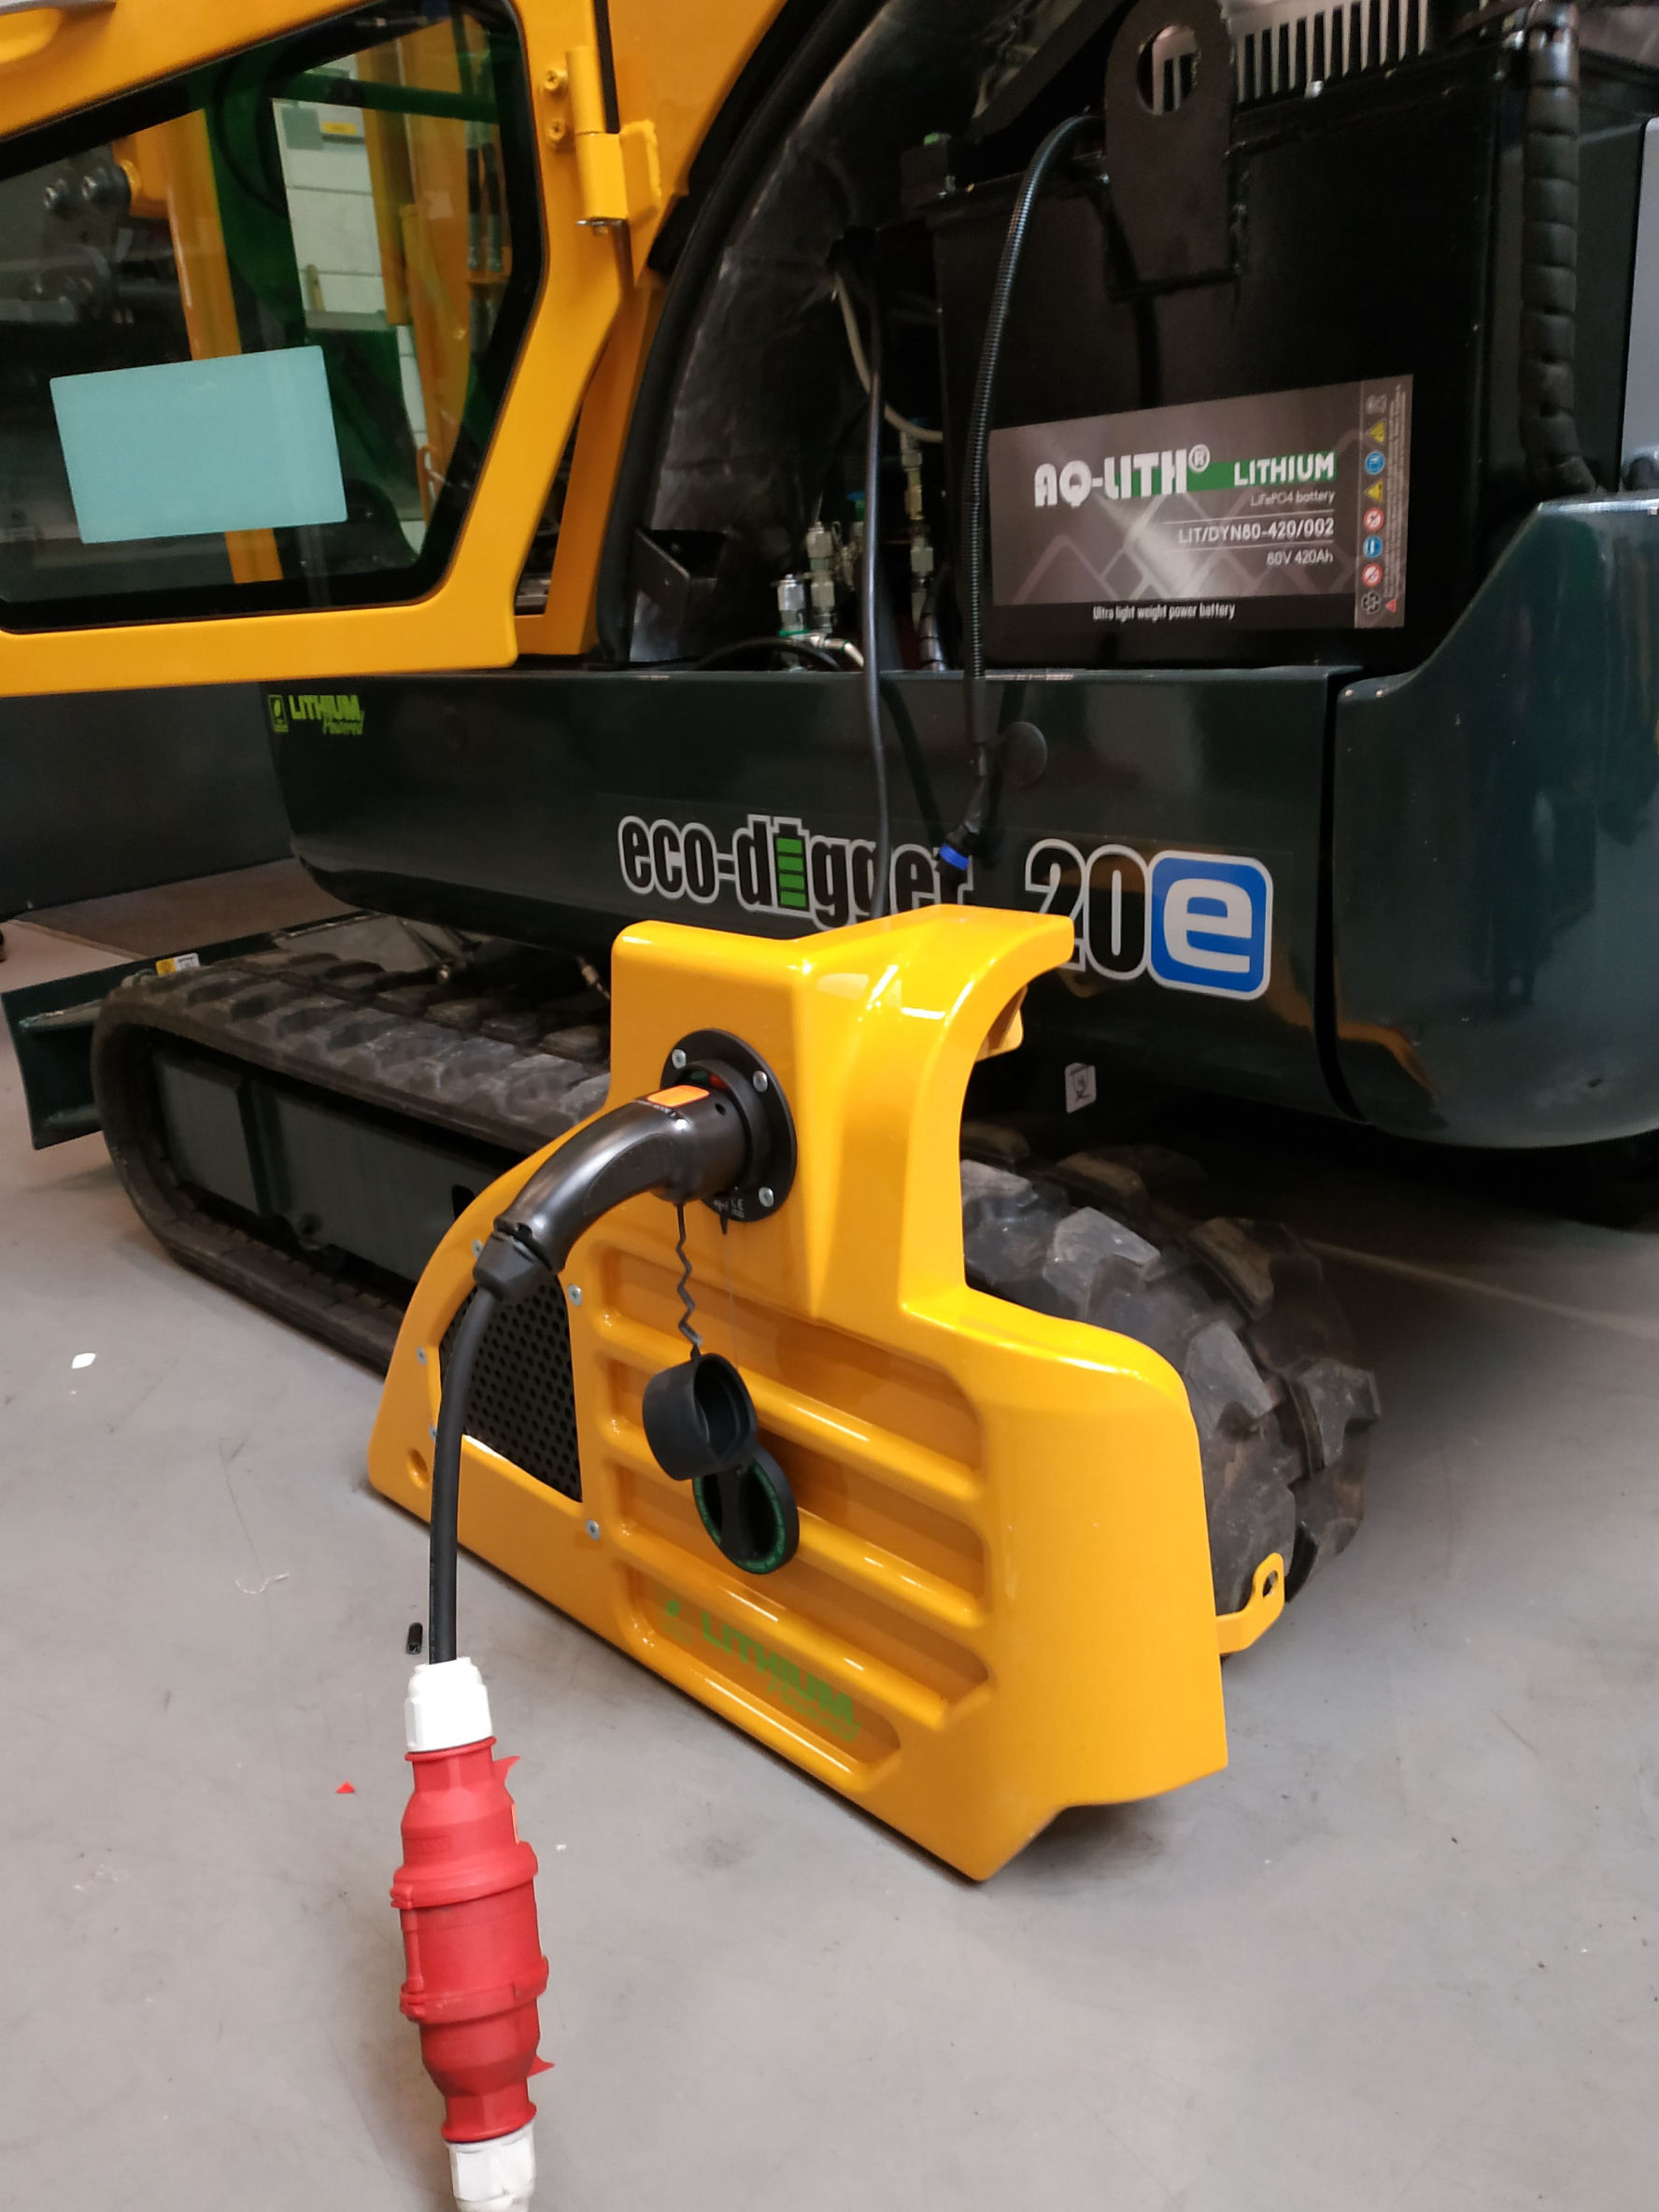 Eco-digger charged via CEE to Type2 adapter during tests